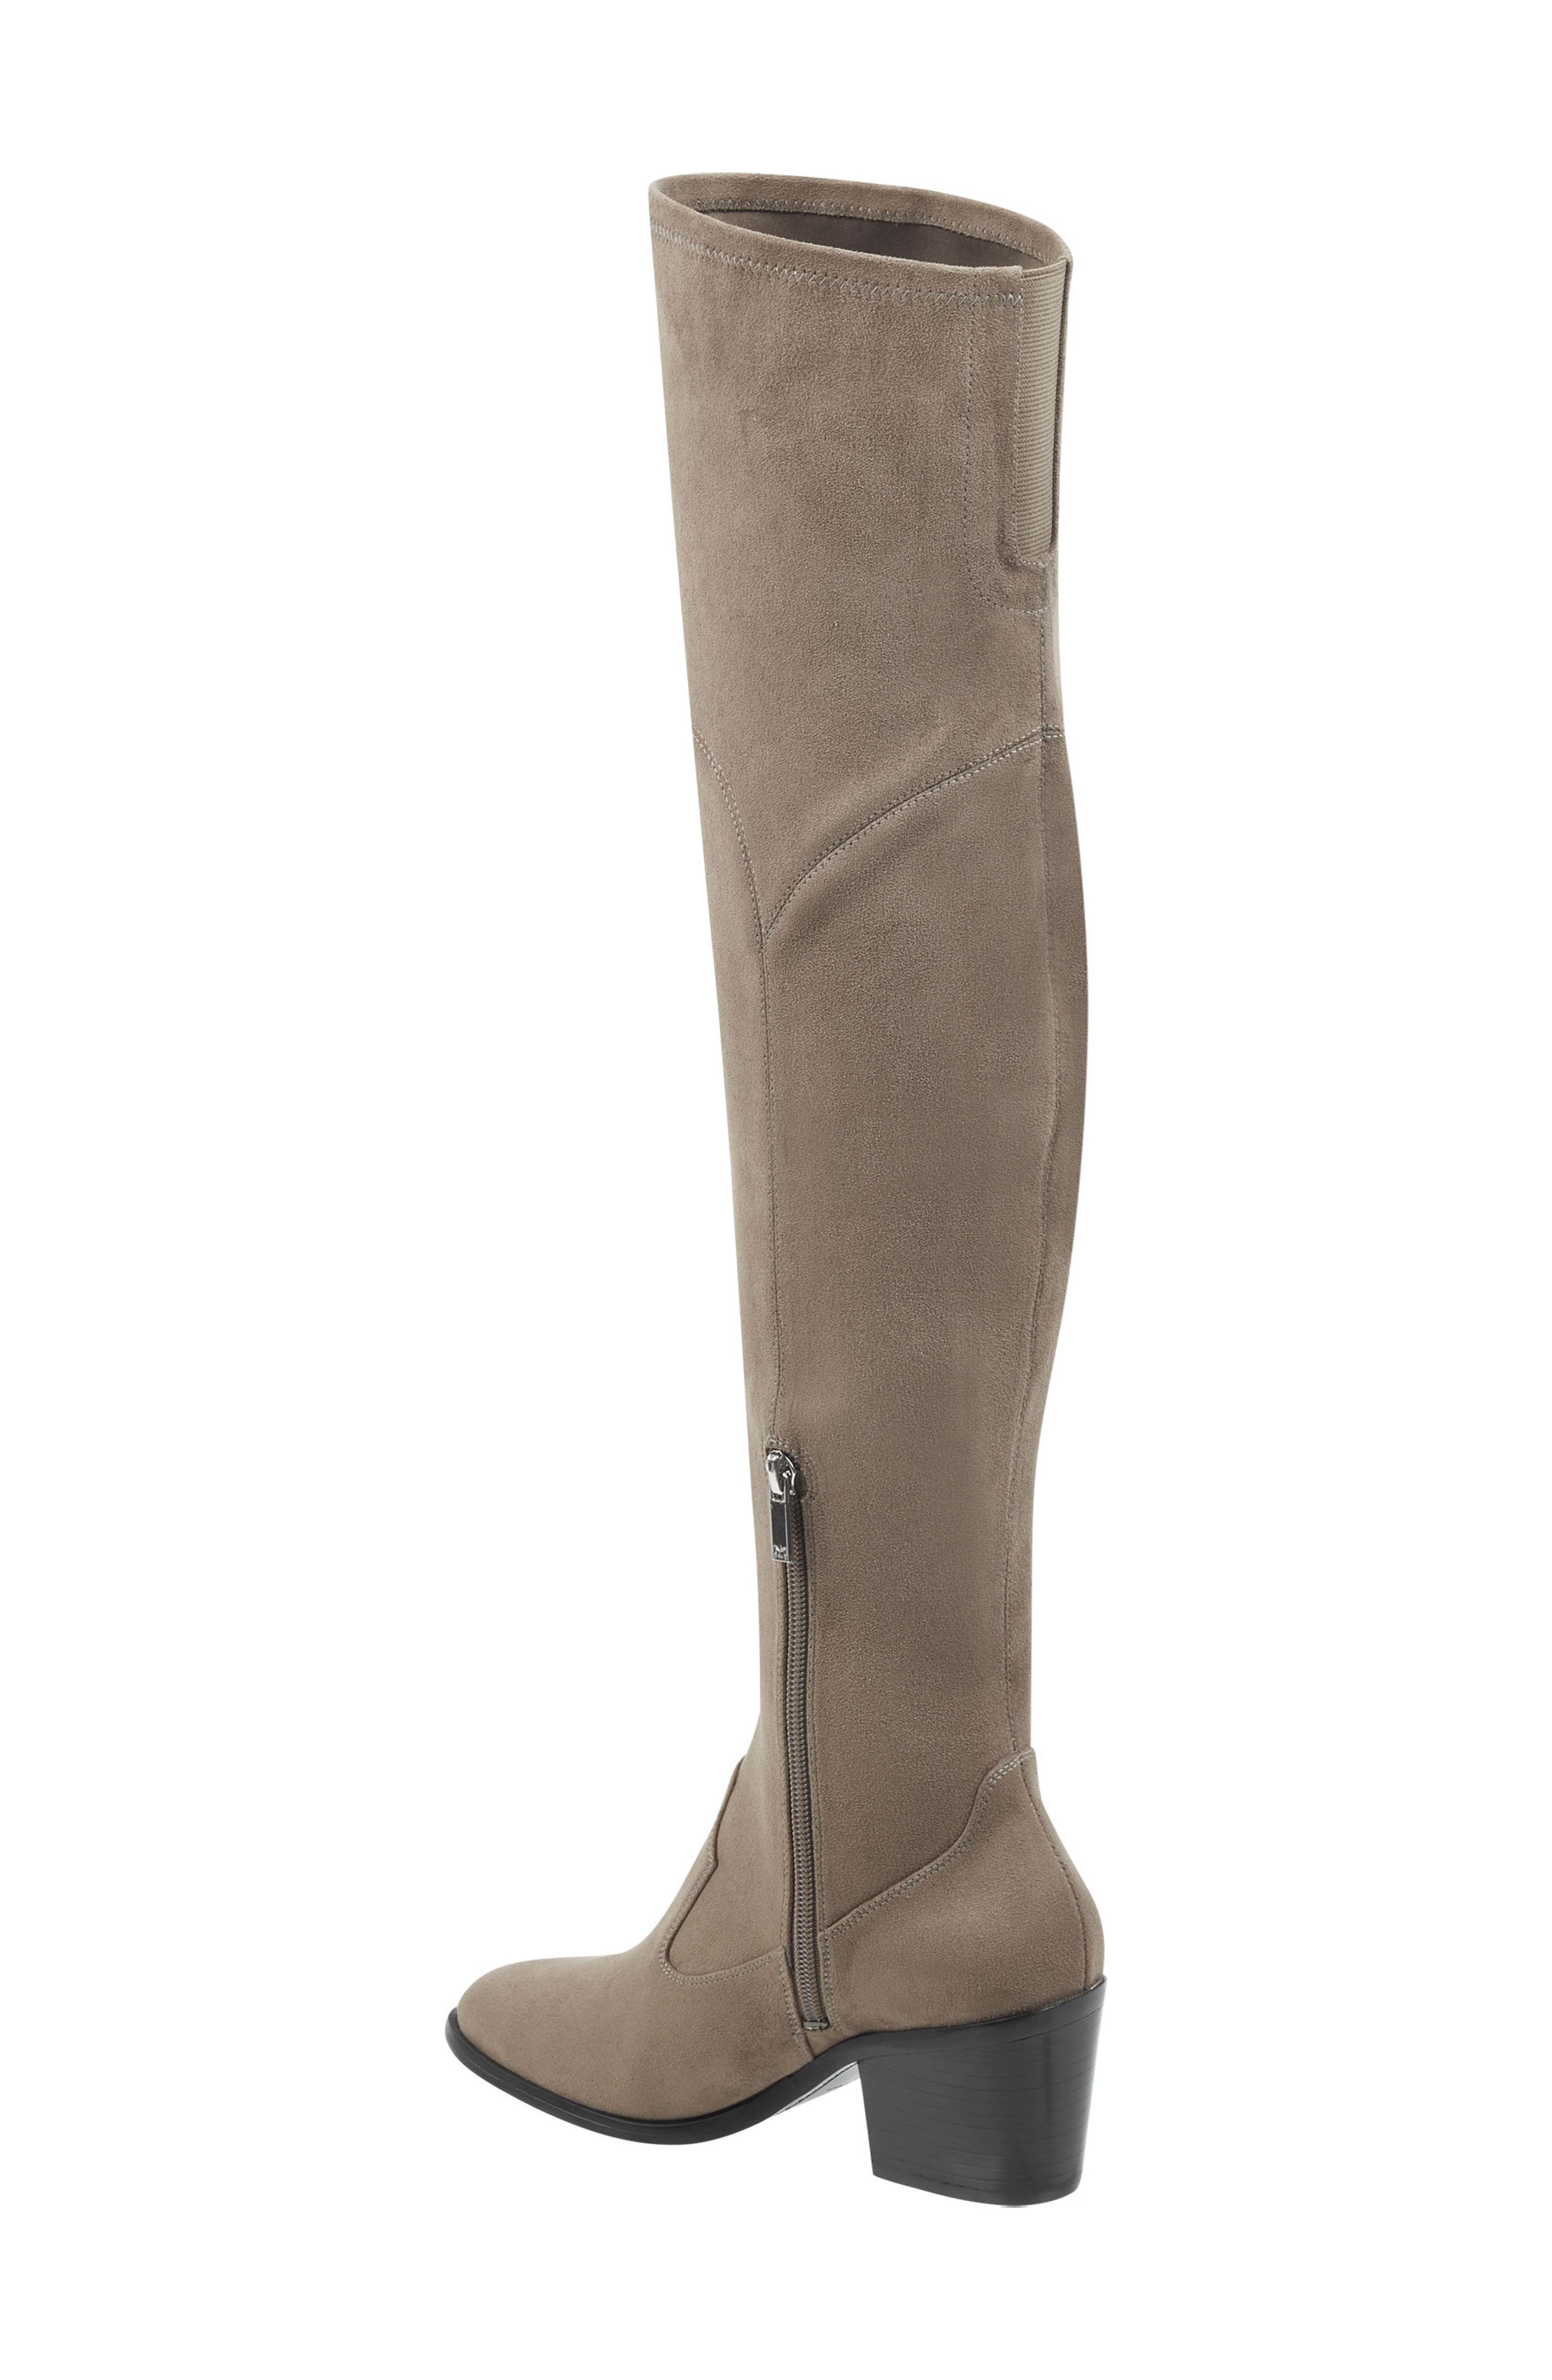 marc fisher ltd over the knee boots